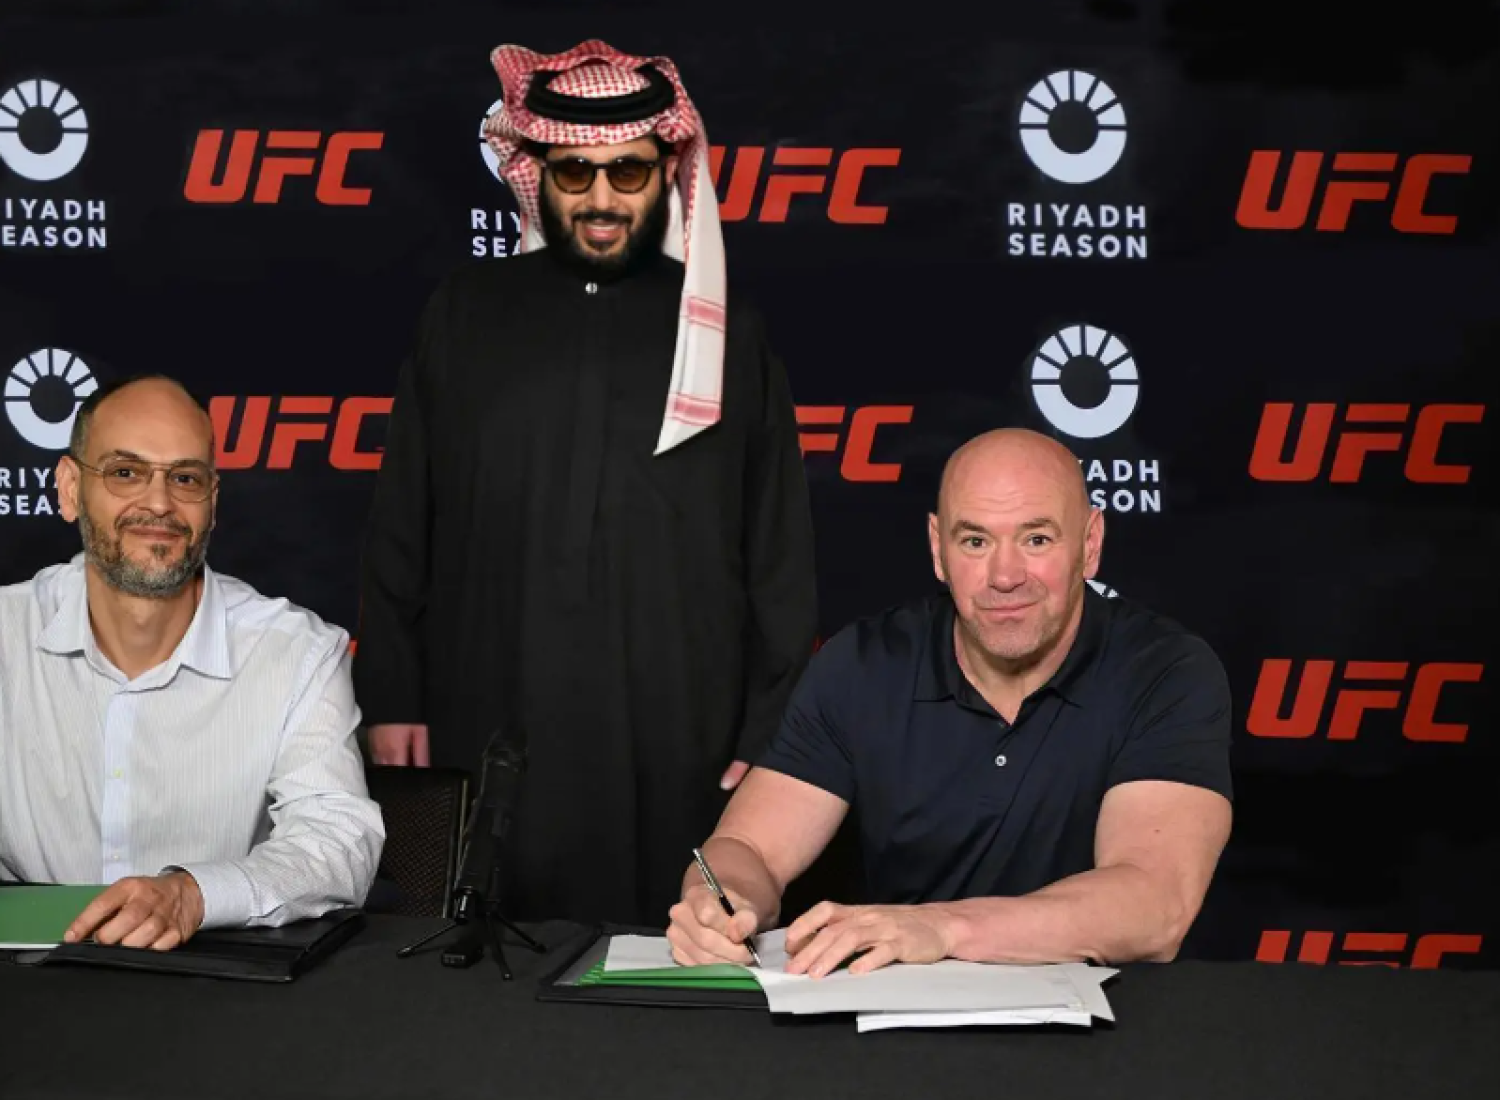 The agreement is part of the Riyadh Season endeavor to host and sponsor prominent international public events and making Riyadh an important location for fighting games in the world - SPA